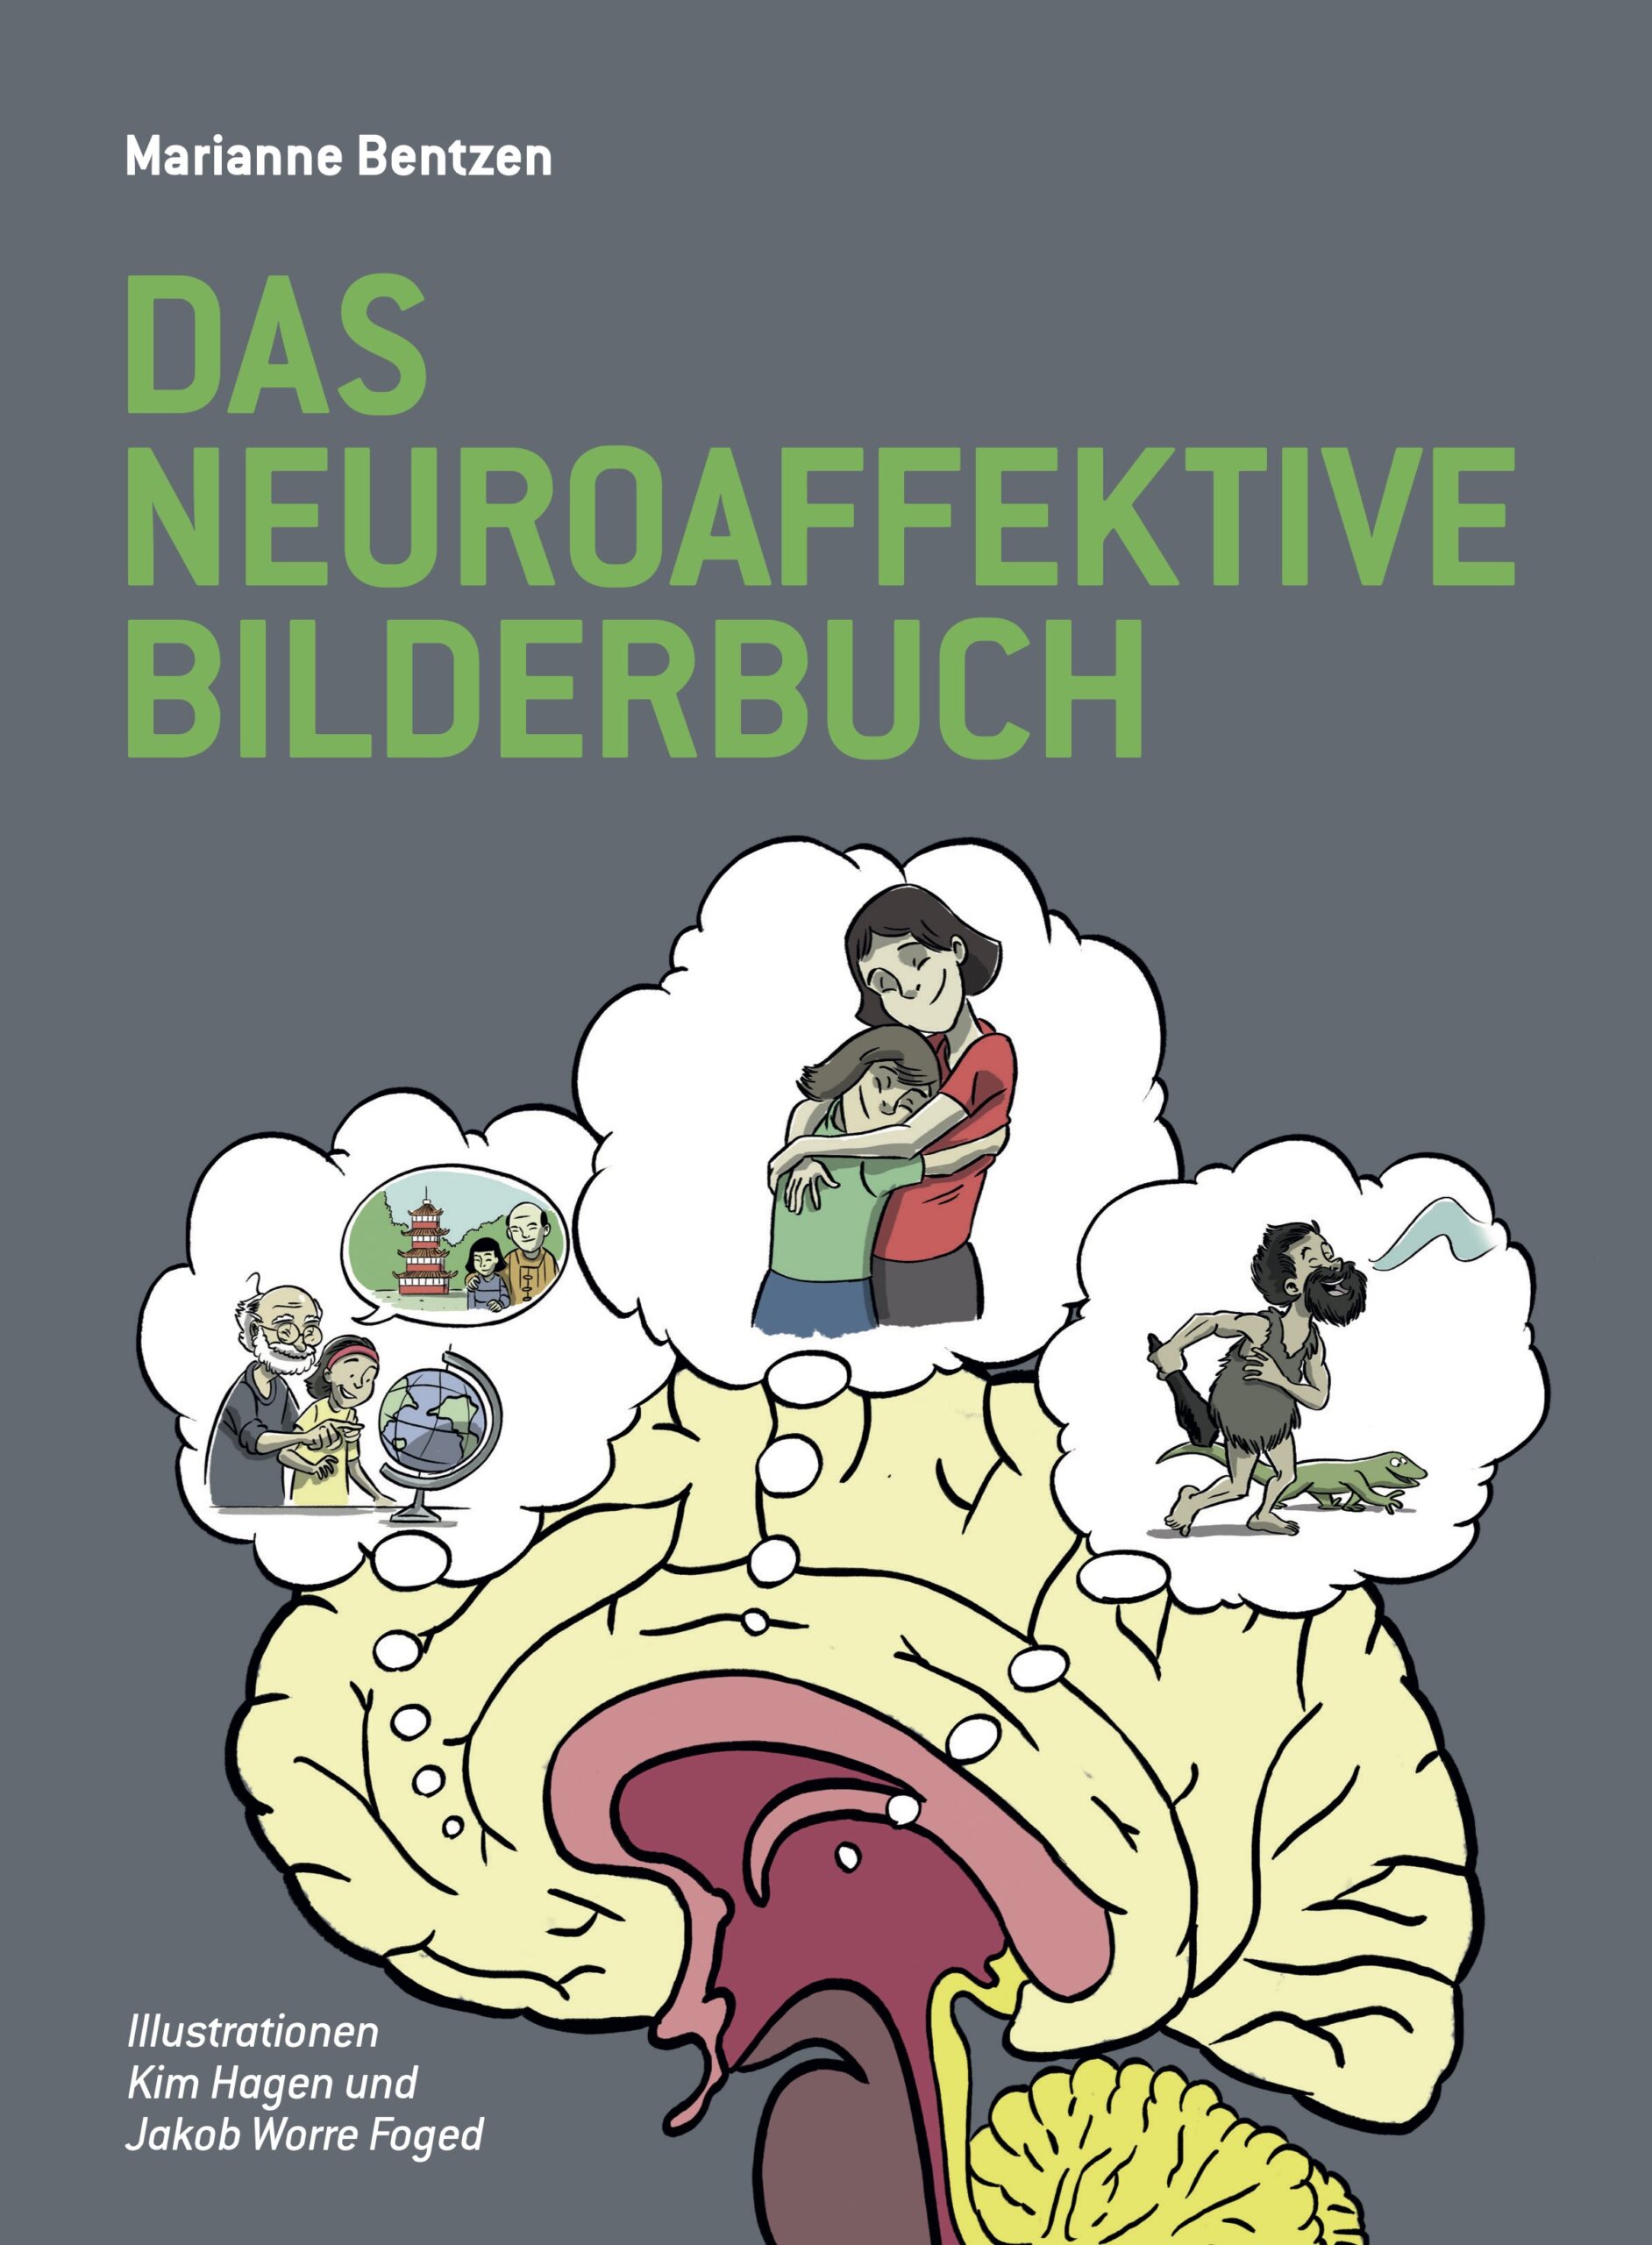 Book cover with German title